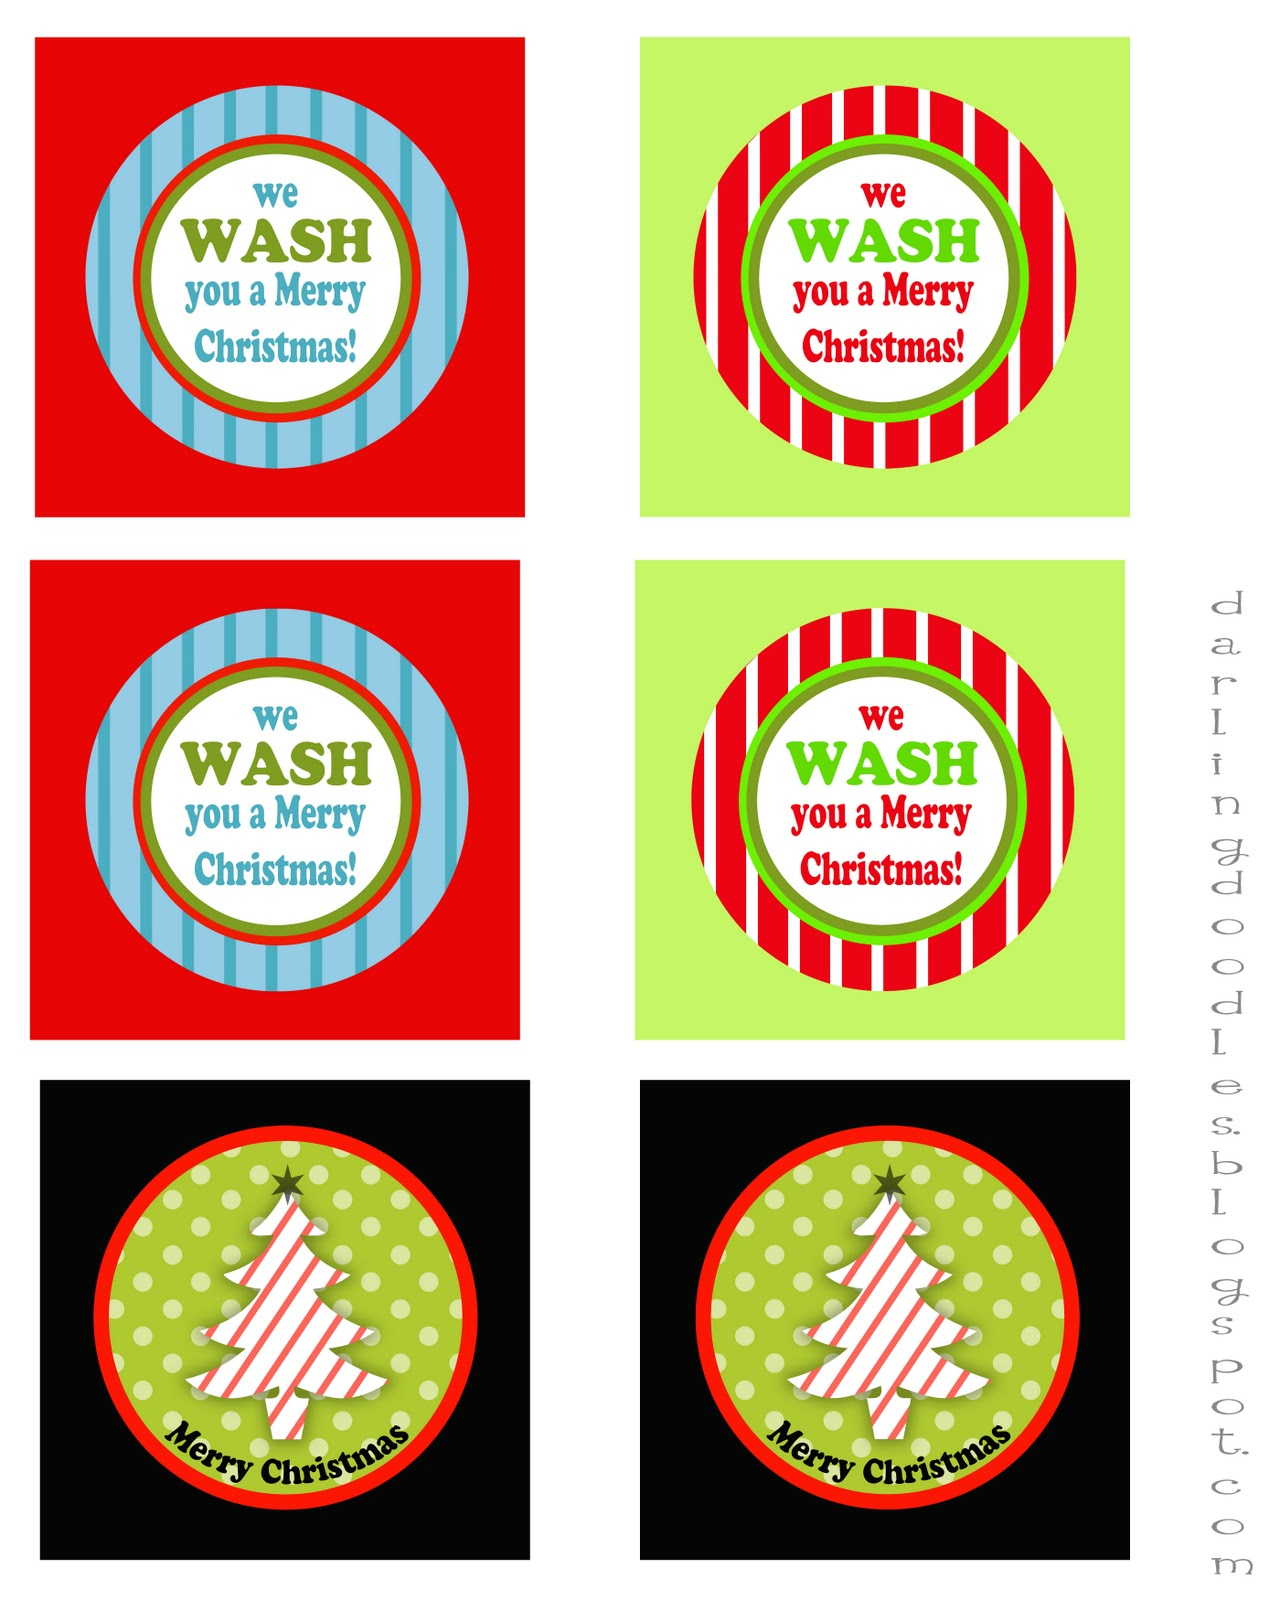 12 Days Of Gift-Mas, Gift #1 - Darling Doodles - We Wash You A Merry Christmas Free Printable